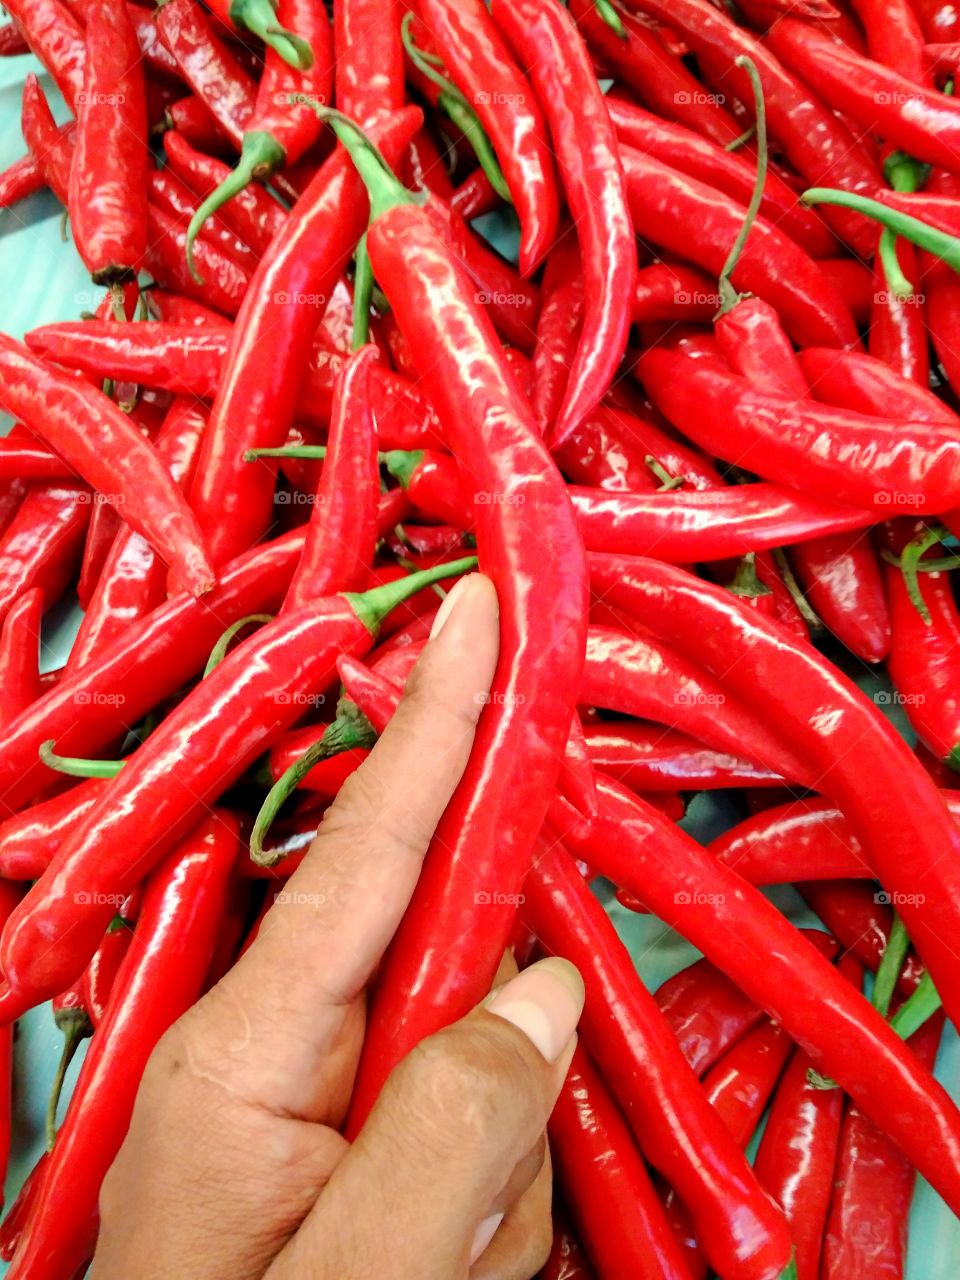 Long red chilis